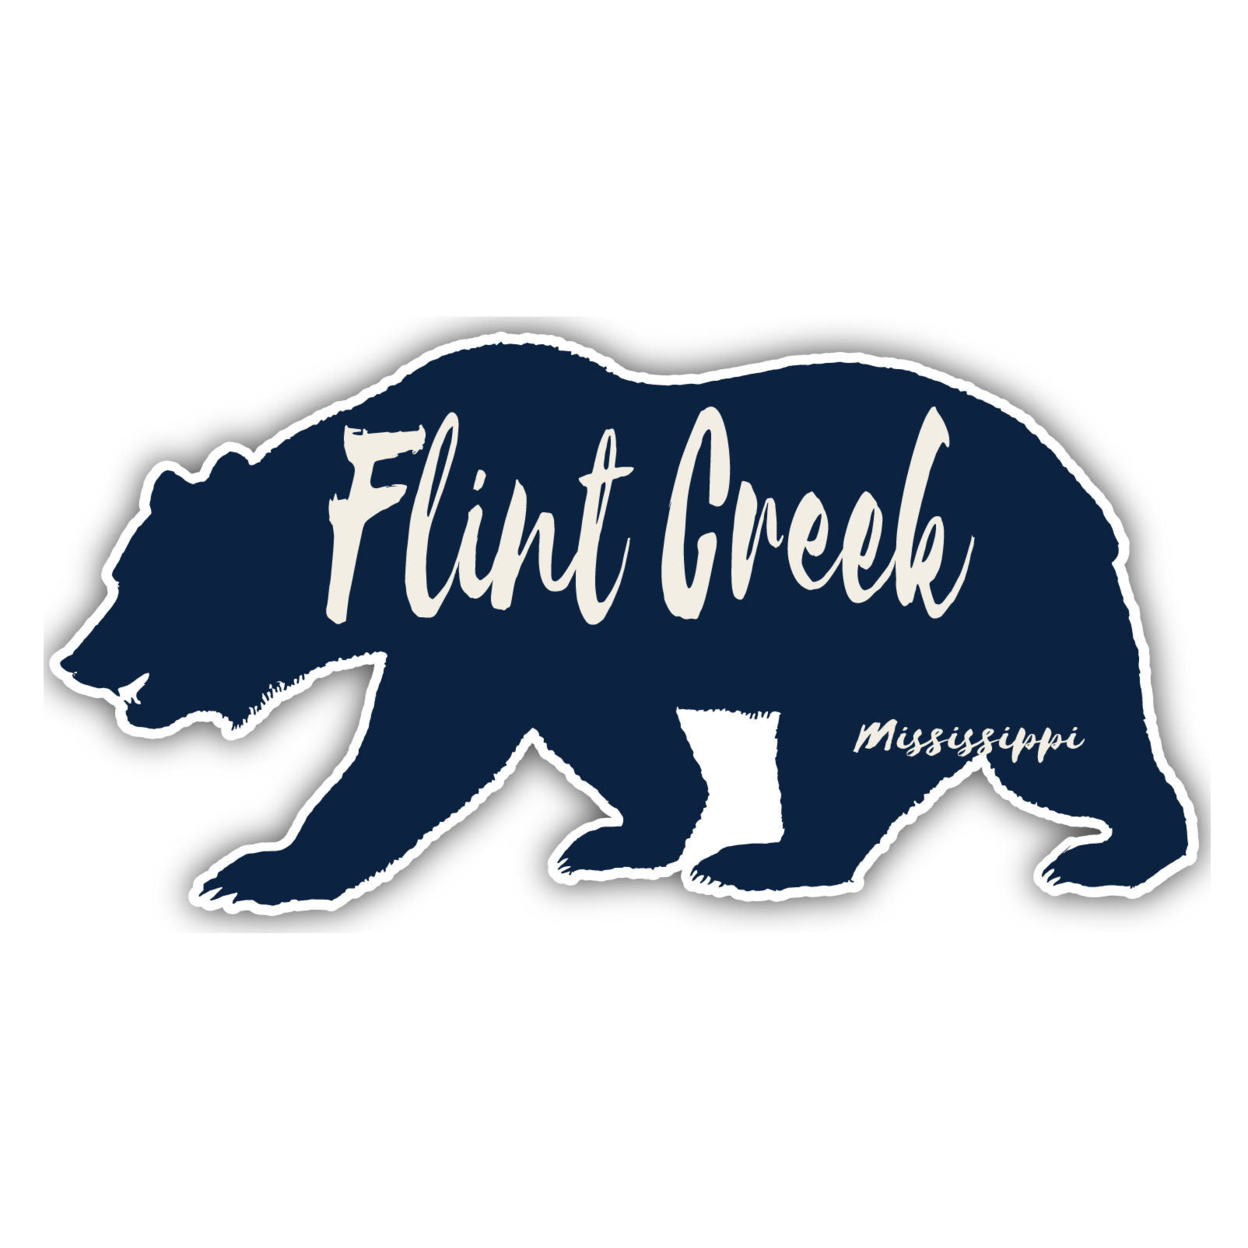 Flint Creek Mississippi Souvenir Decorative Stickers (Choose Theme And Size) - 4-Pack, 6-Inch, Bear